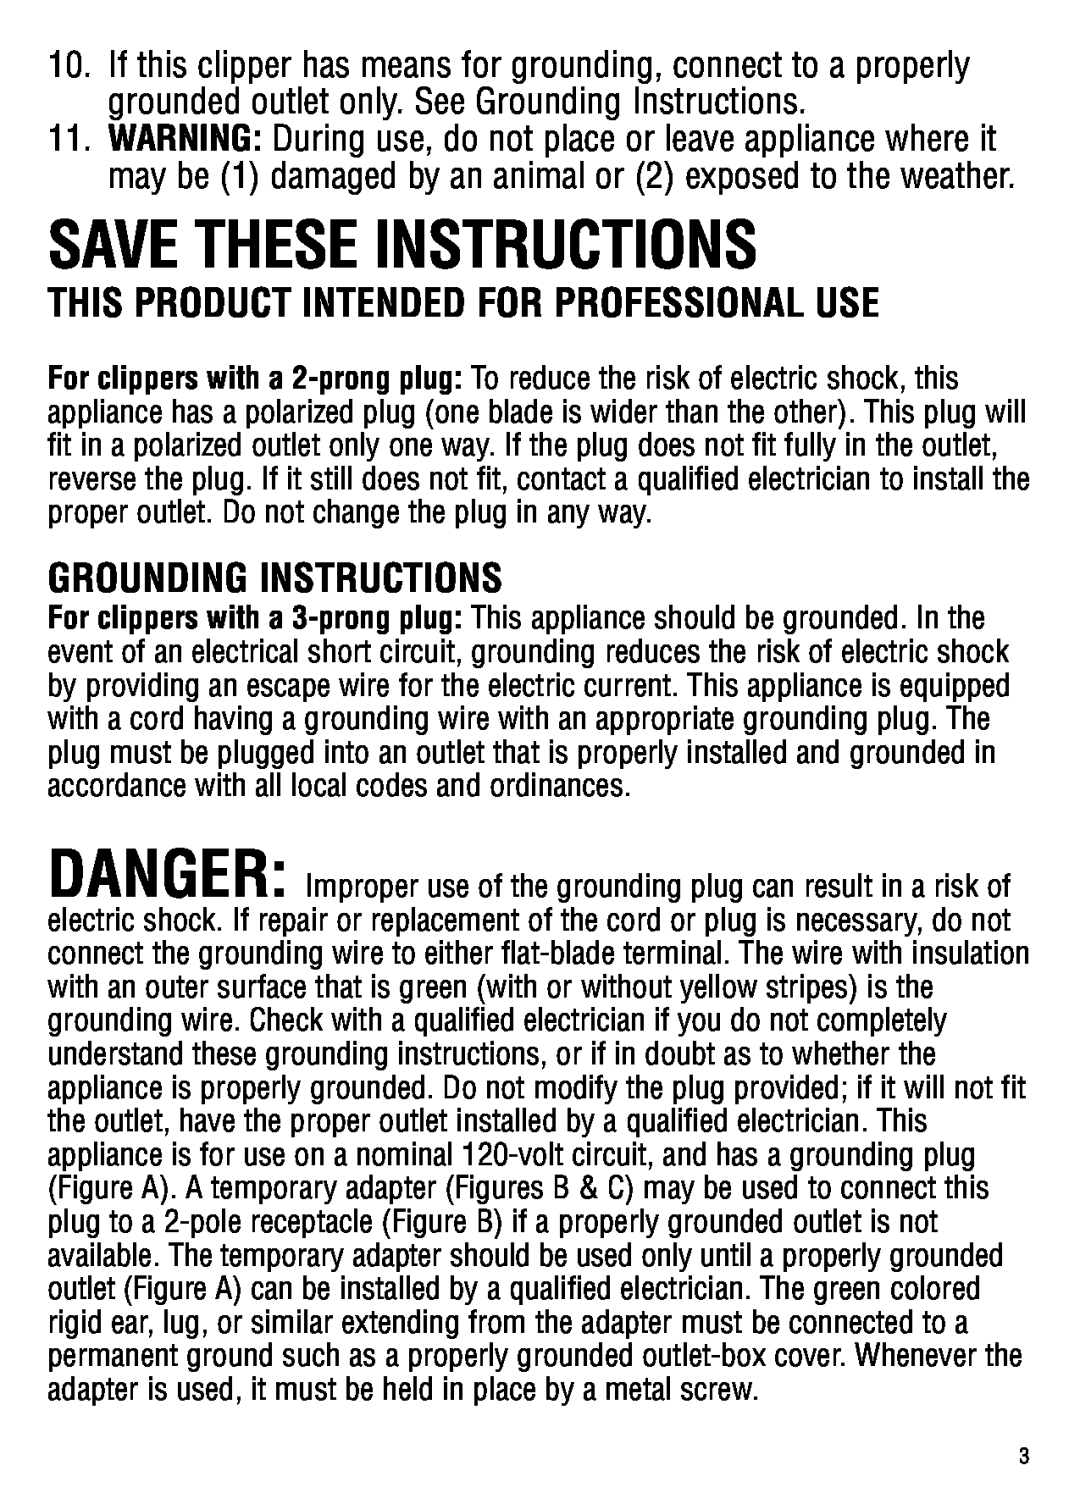 Andis Company GC, ML manual save these instructions, This Product Intended For Professional Use, Grounding Instructions 